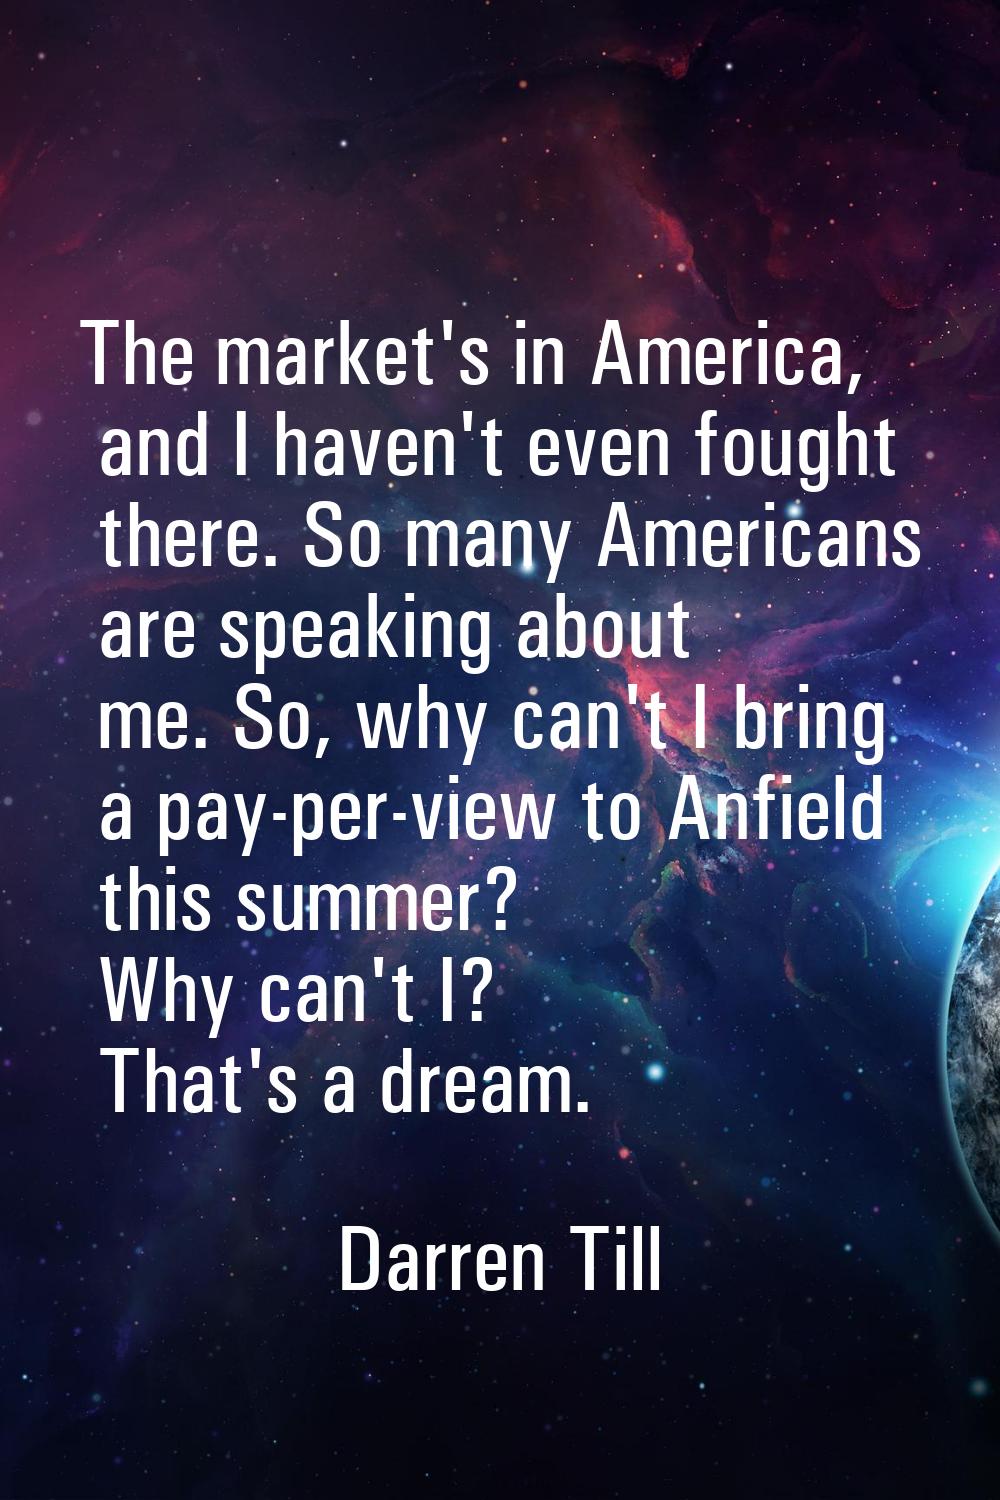 The market's in America, and I haven't even fought there. So many Americans are speaking about me. 